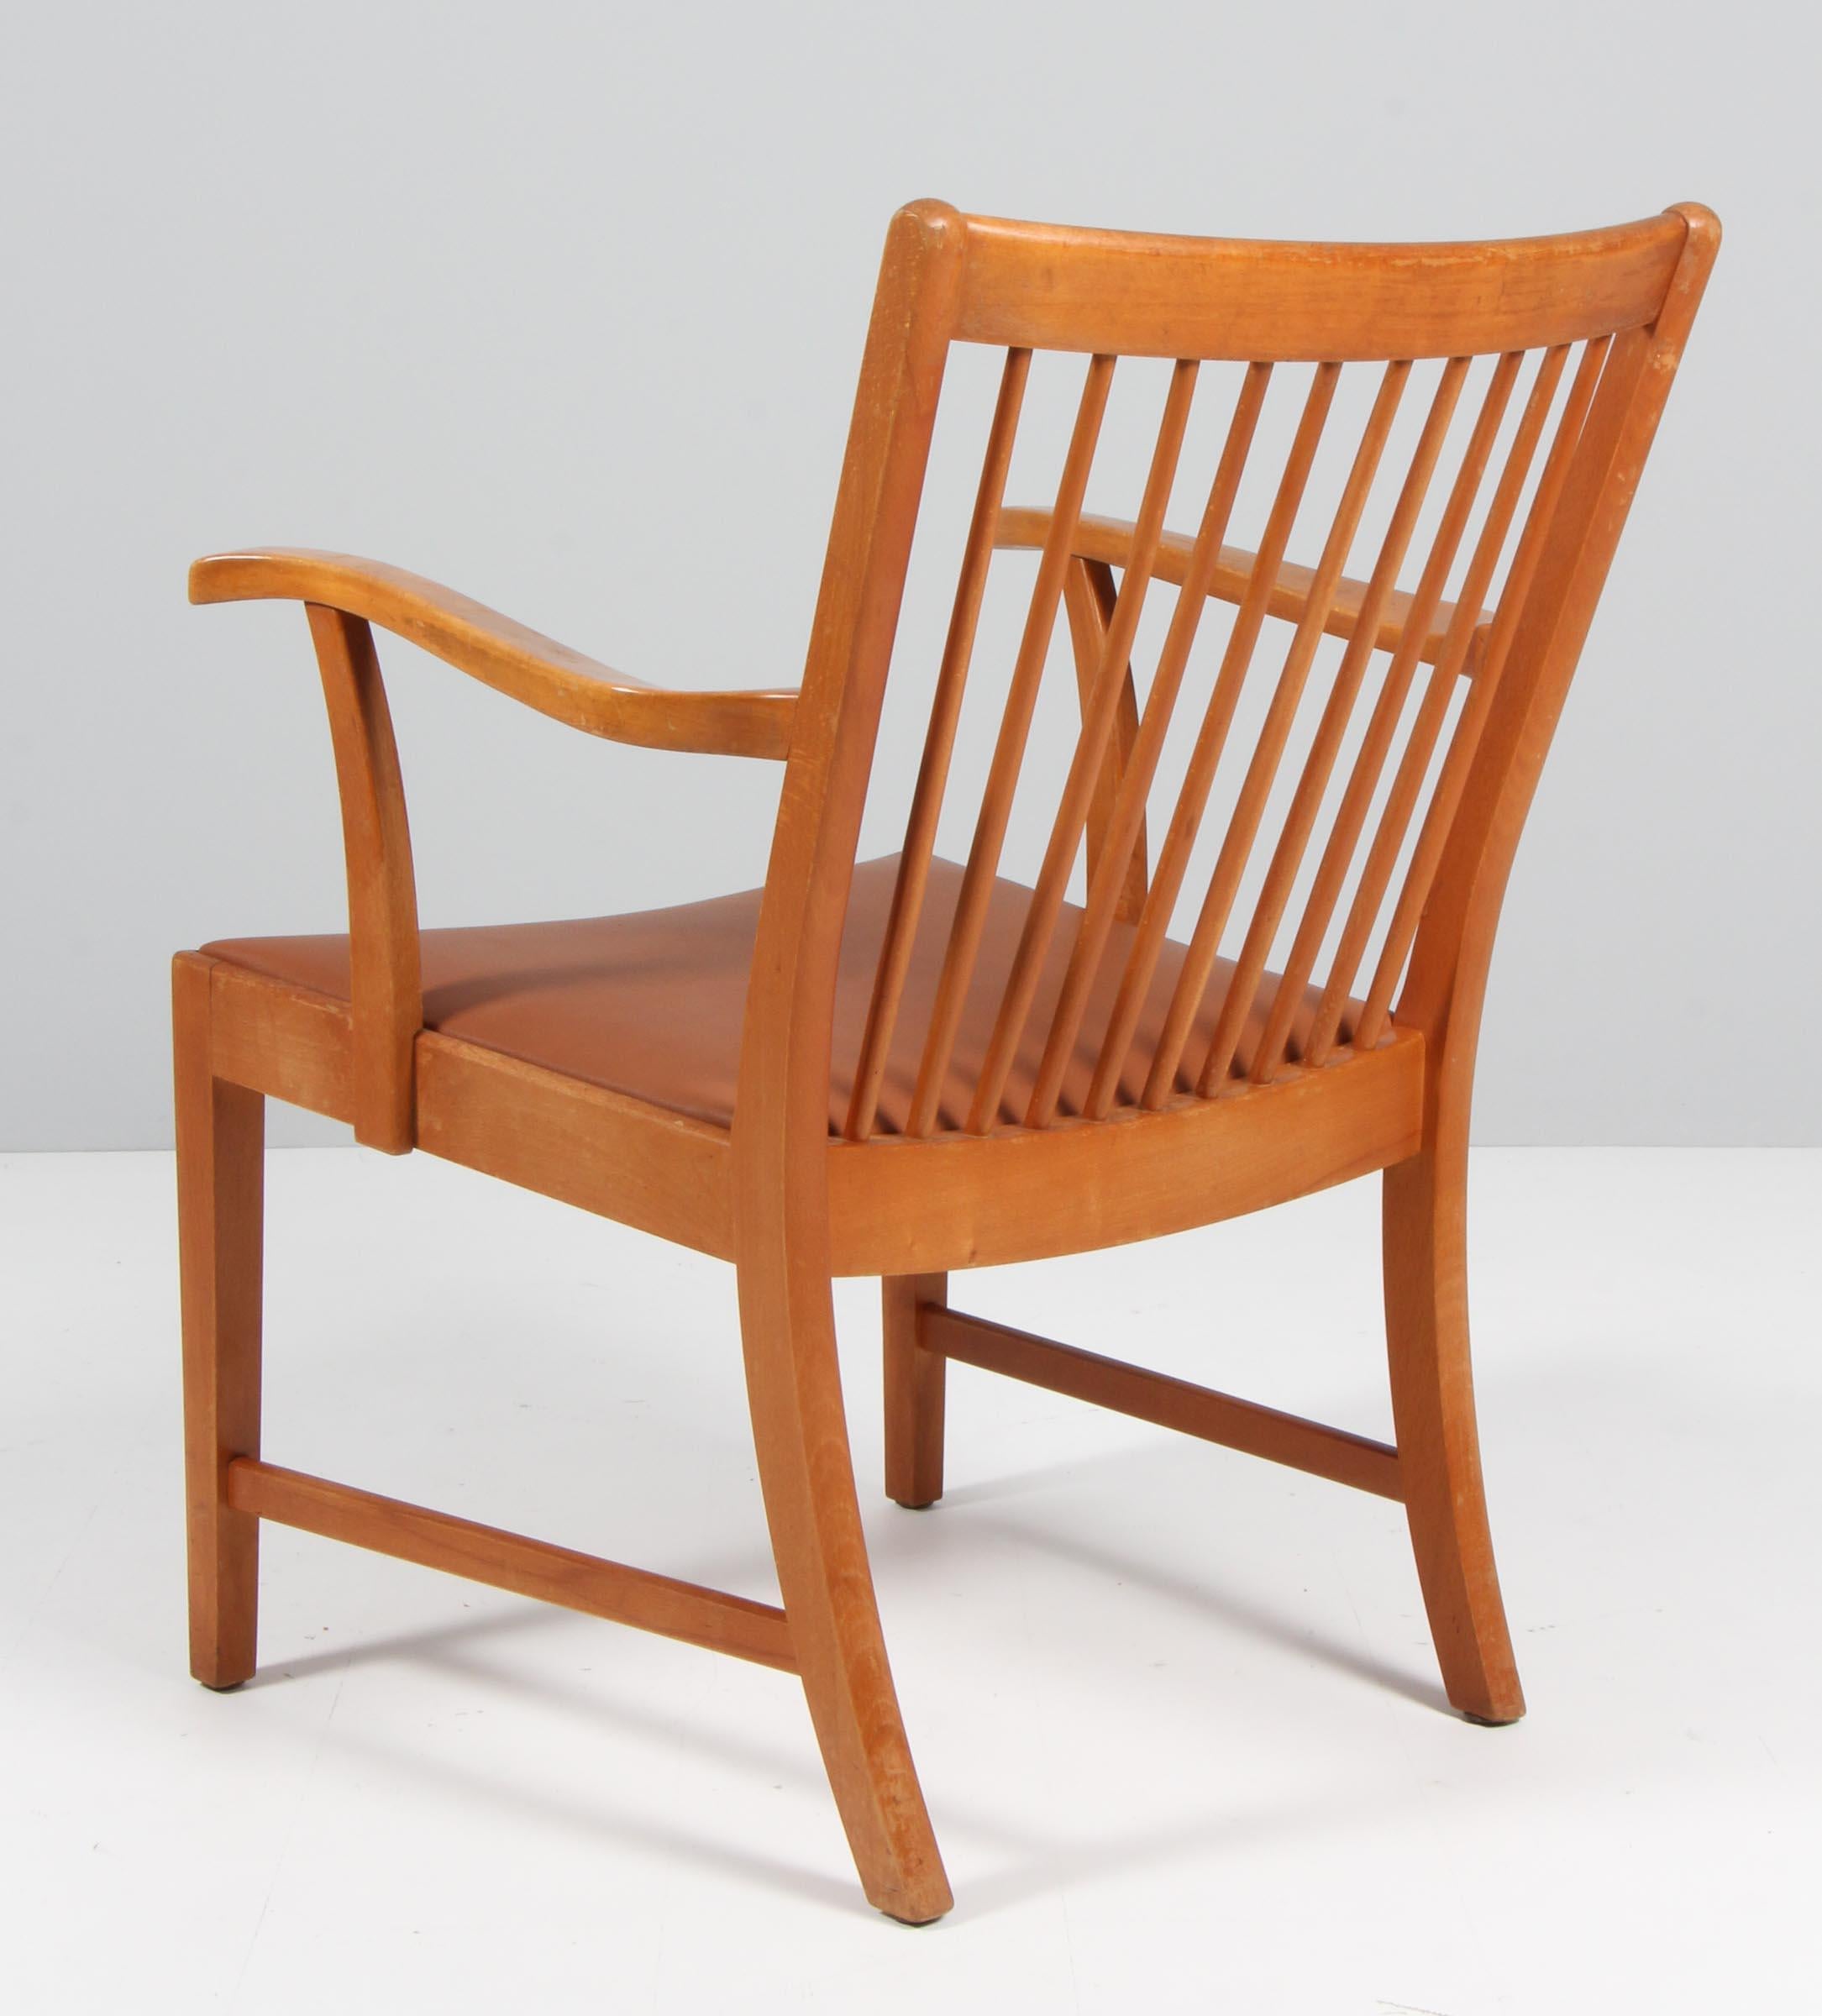 Late 20th Century Børge Mogensen Armchair, Beech and Aniline Leather